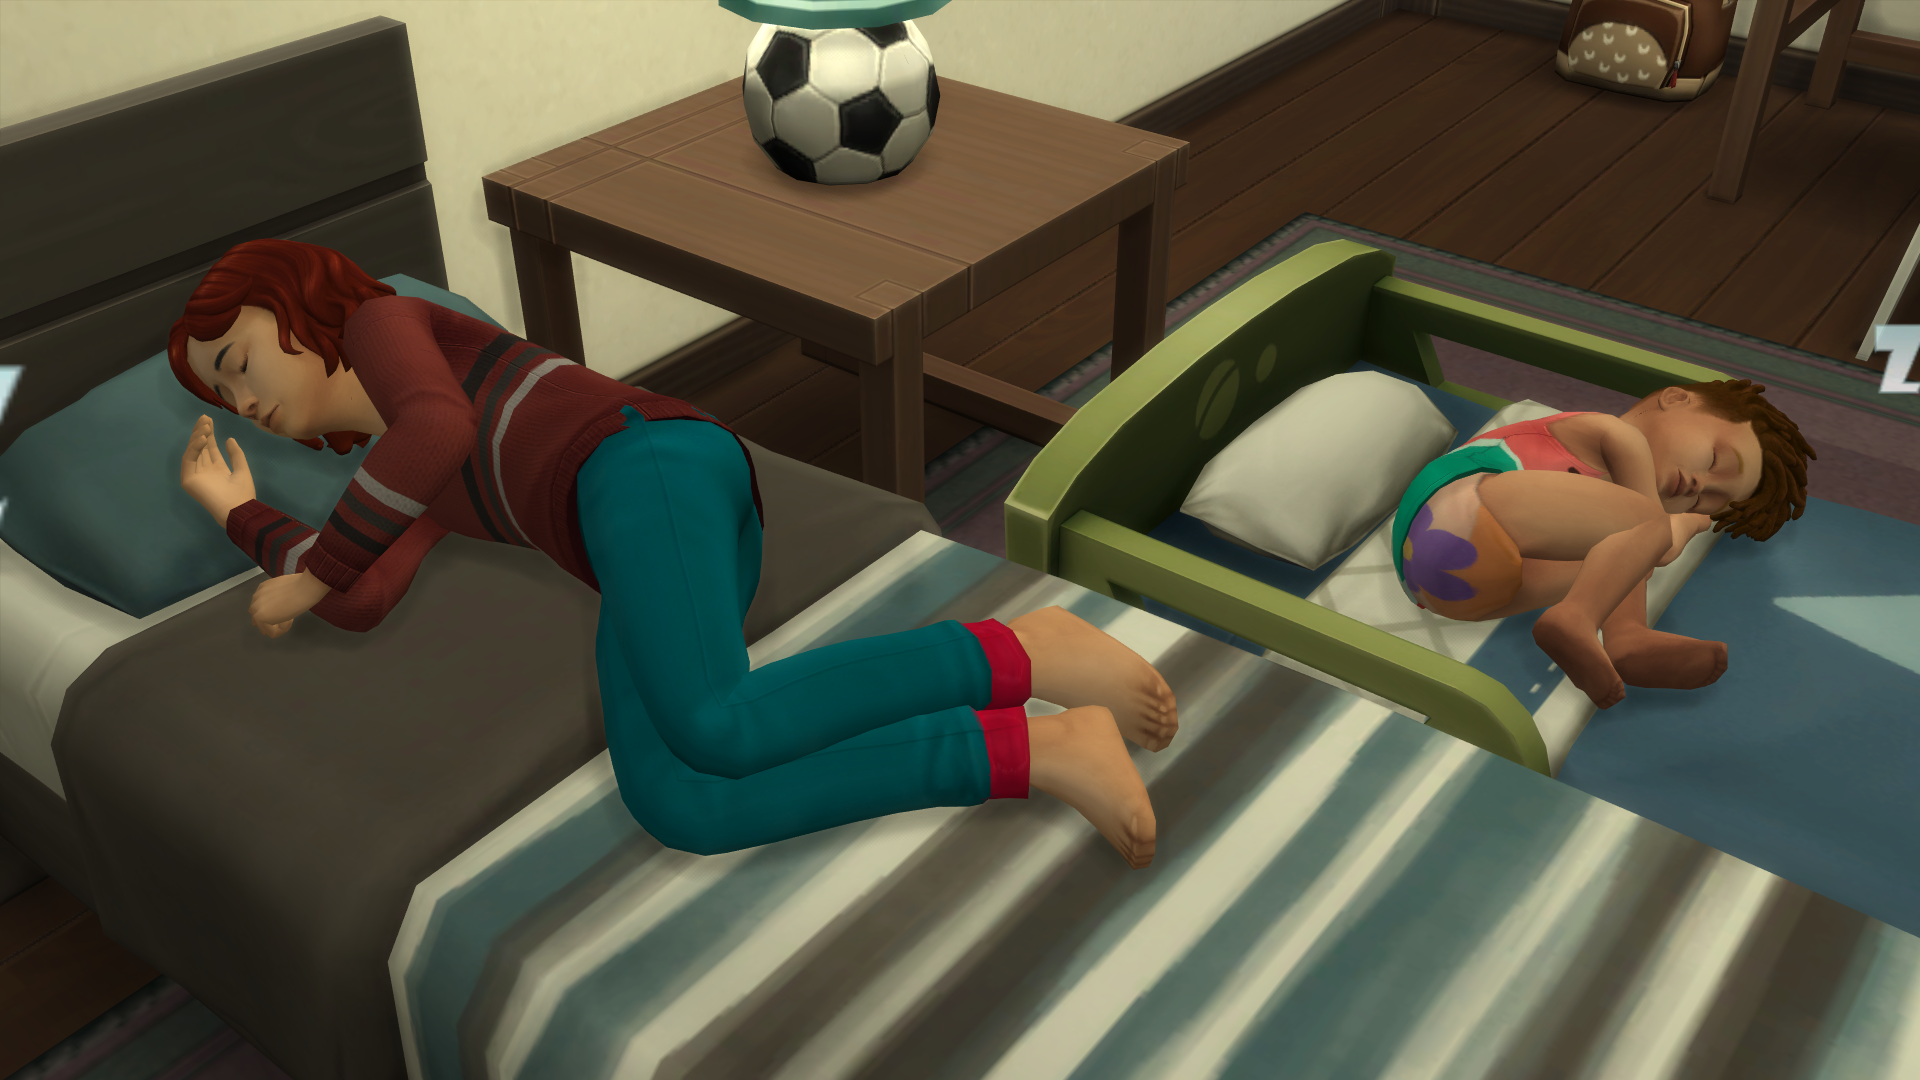 Mod The Sims Take shoes off while sleeping & in bed